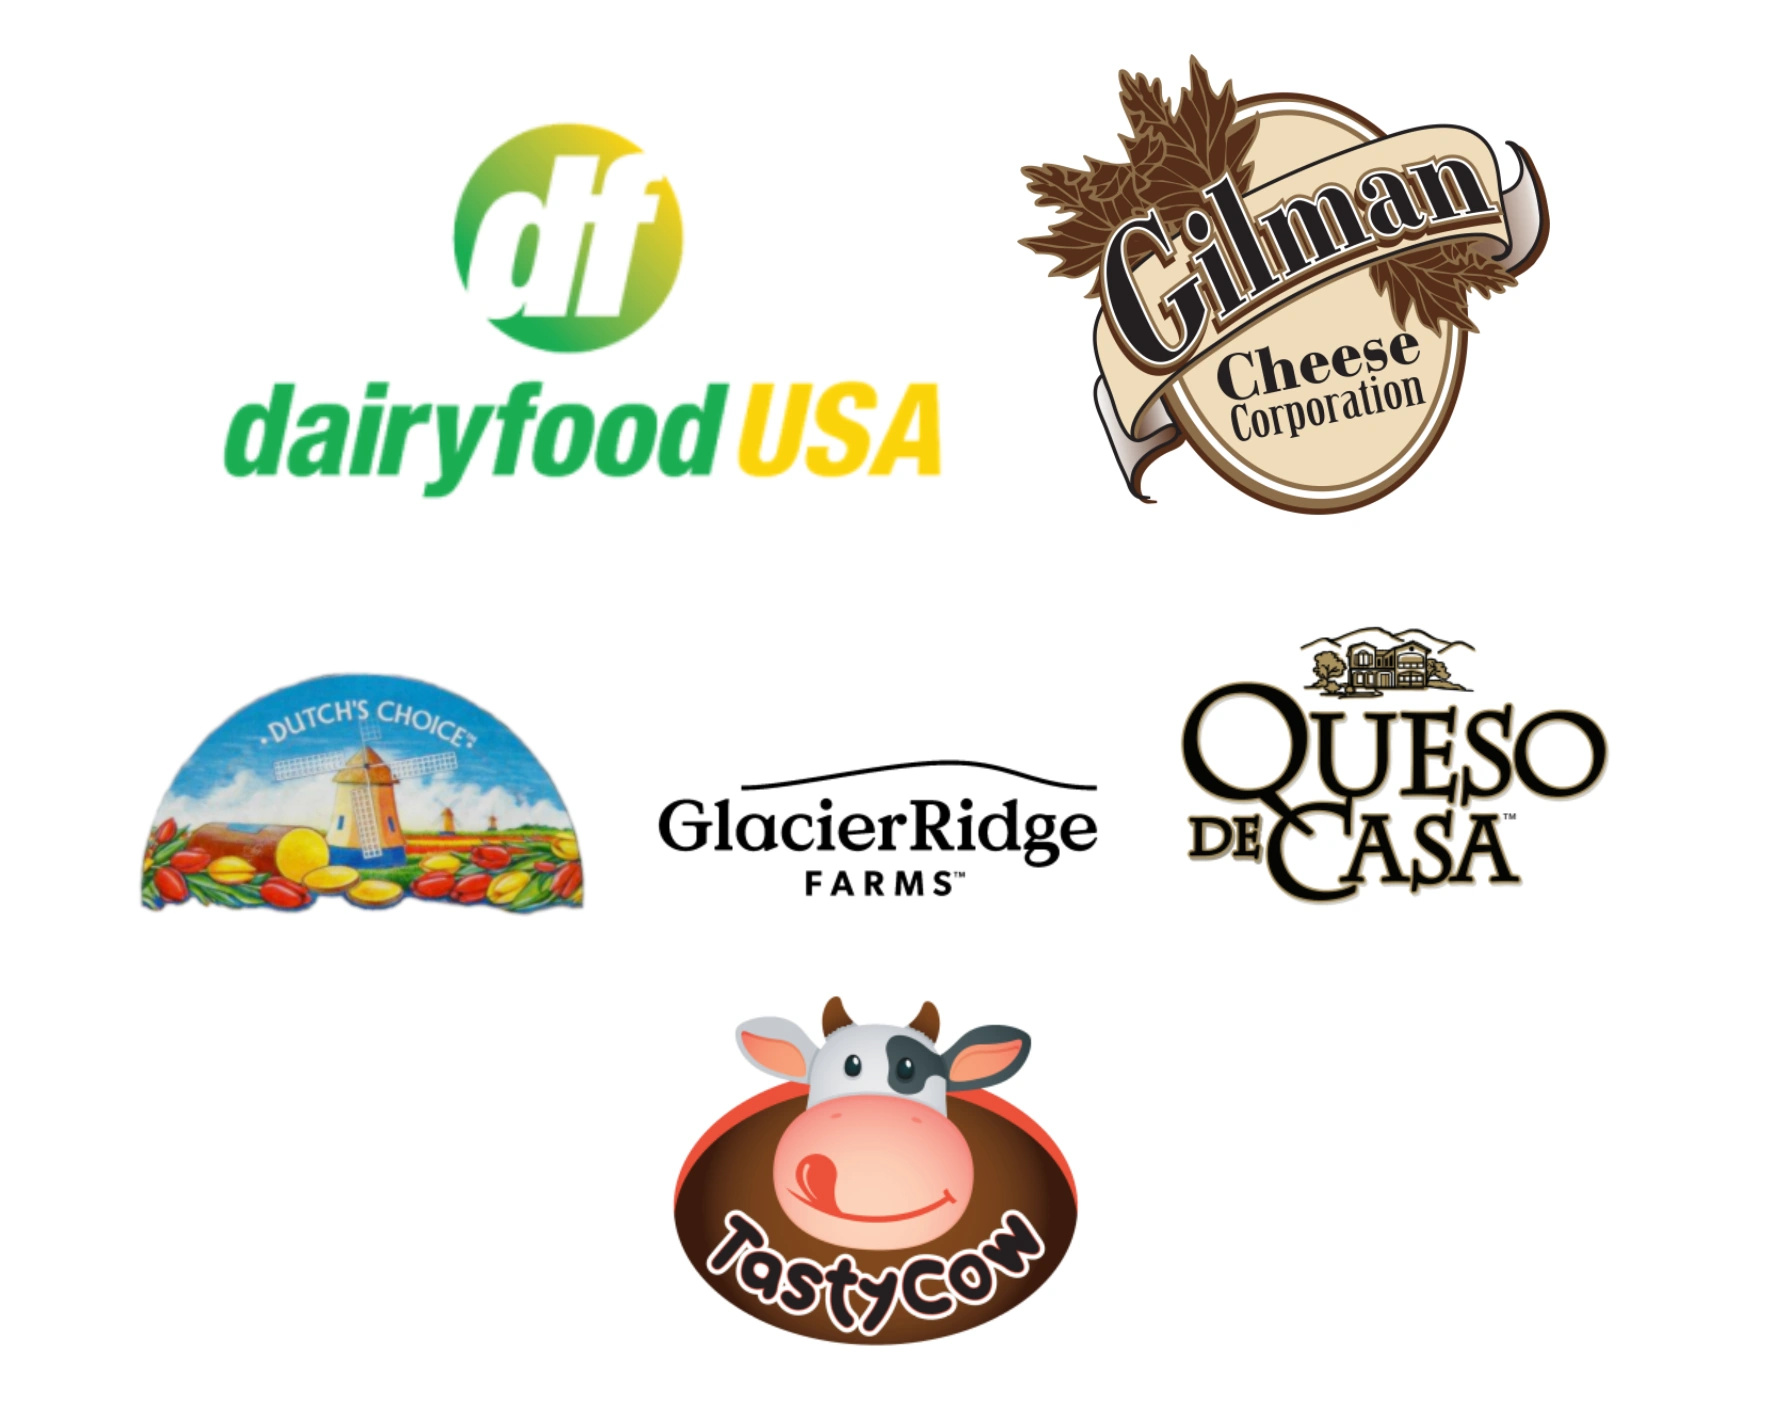 all of the brands owned by Gilman Cheese Corp